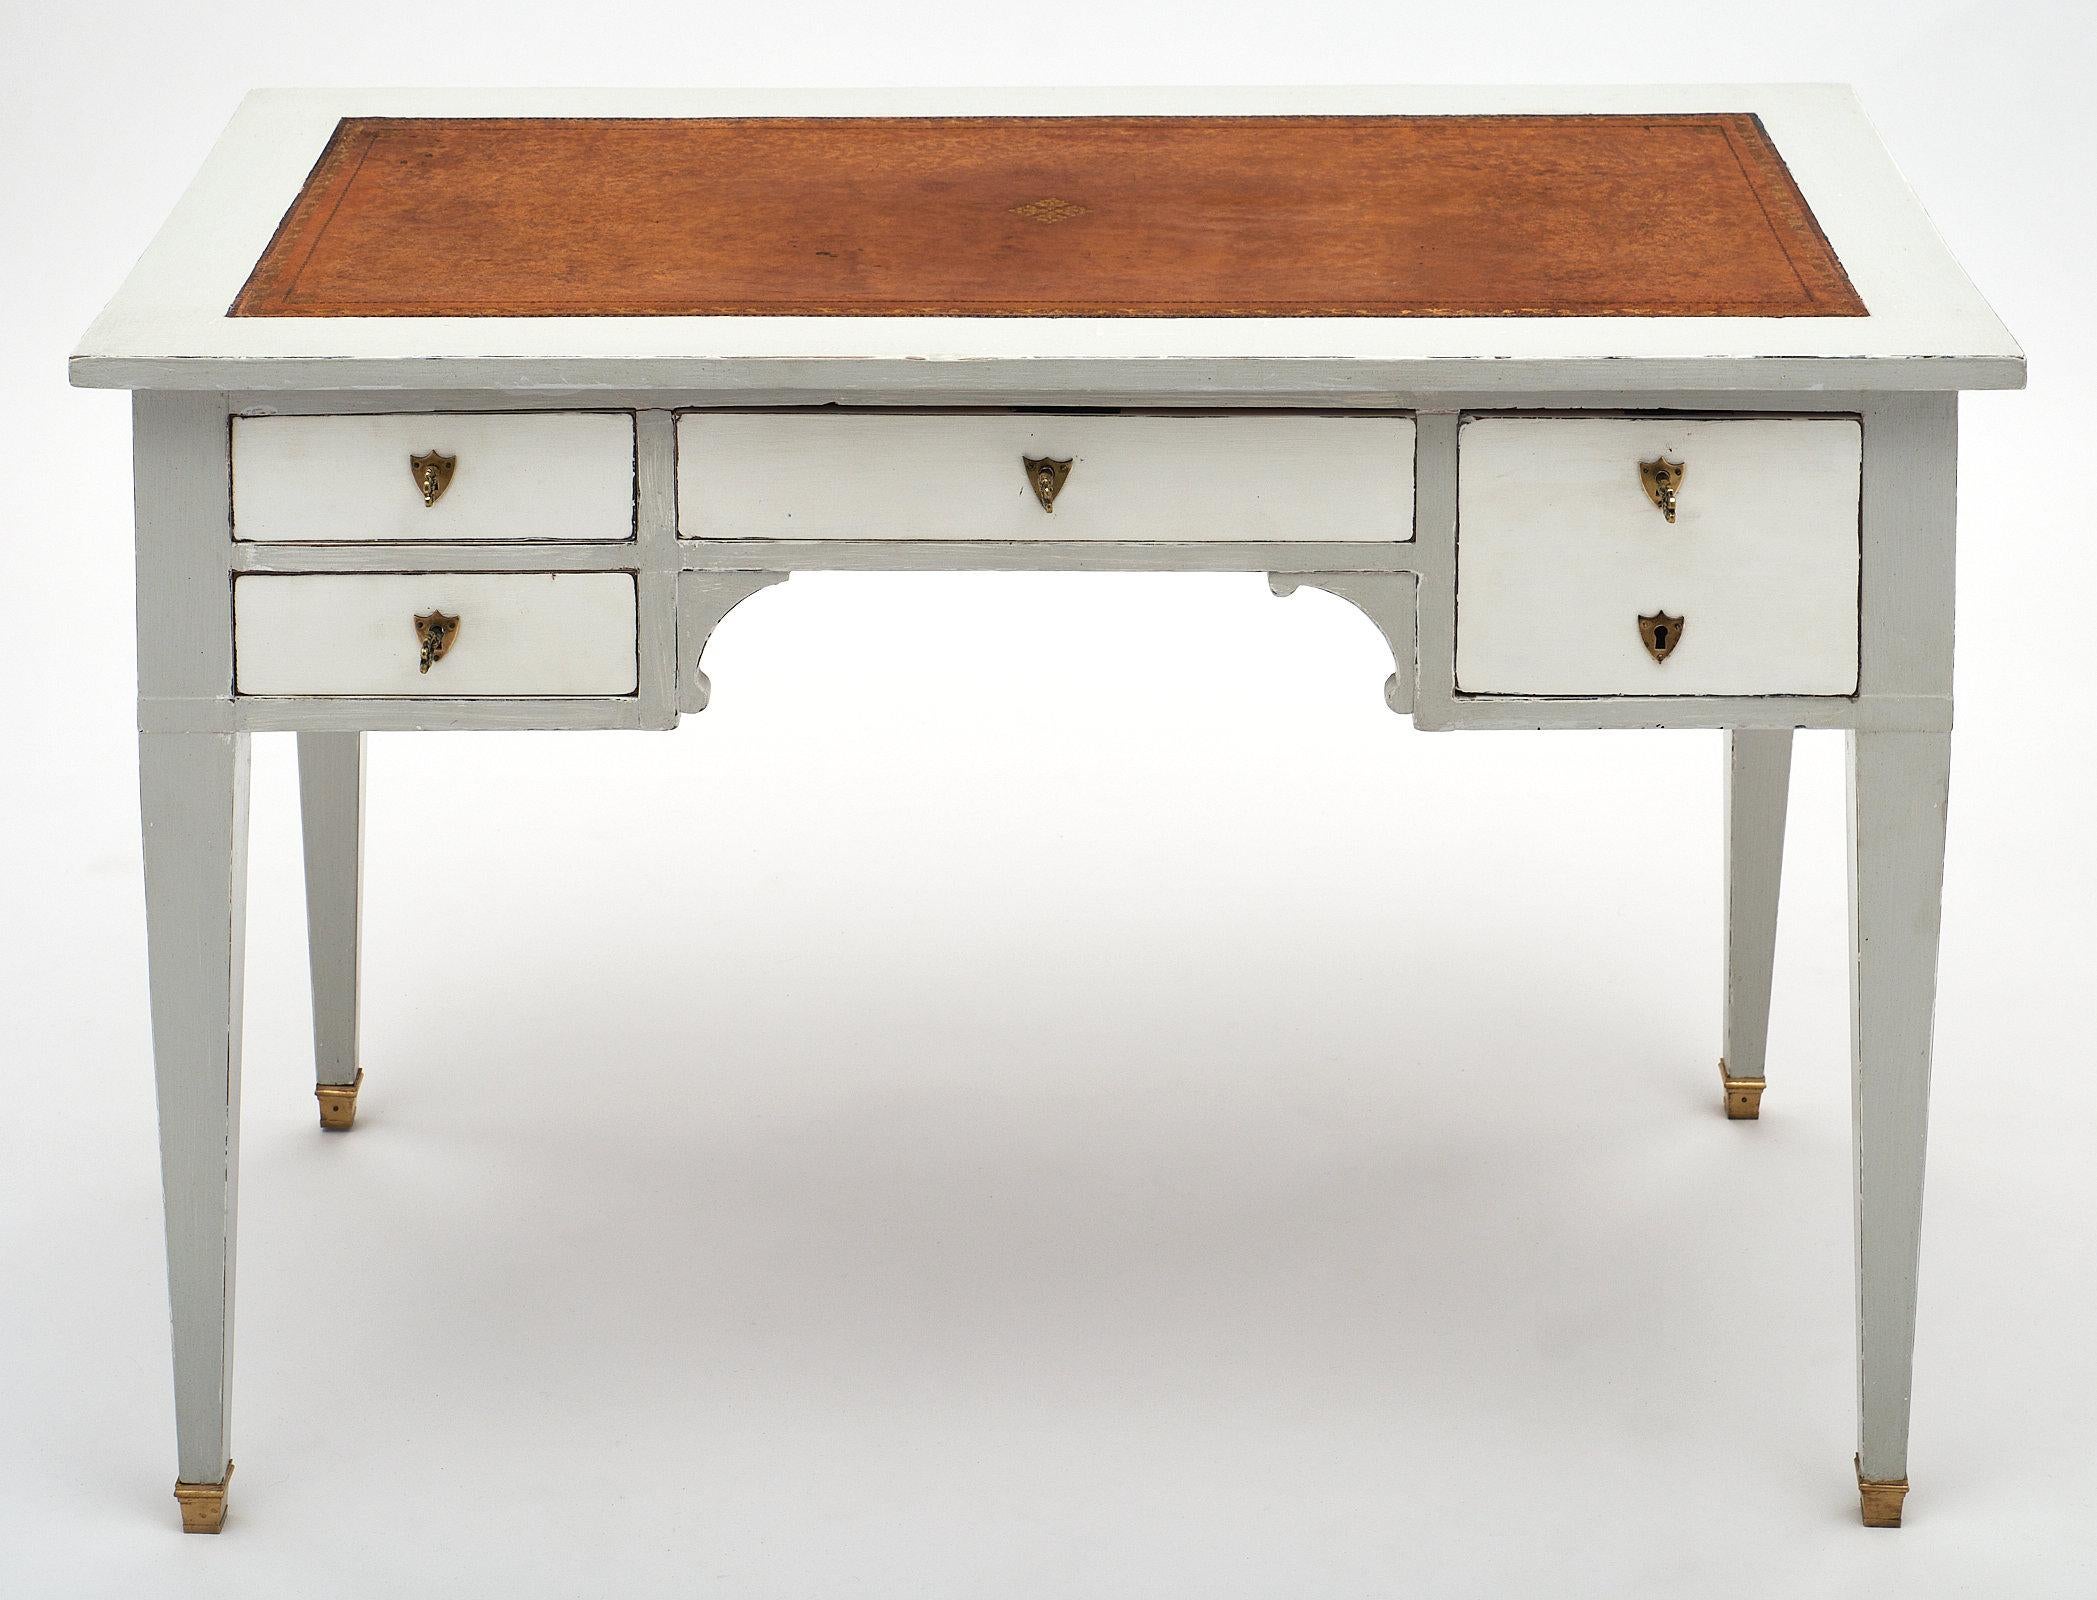 Painted Directoire style desk with leather top. This piece is made of solid mahogany and hand-painted in white and trianon grey. There are five dovetailed drawers, and the back features hardware, making it a faux partner desk. We love the beautiful